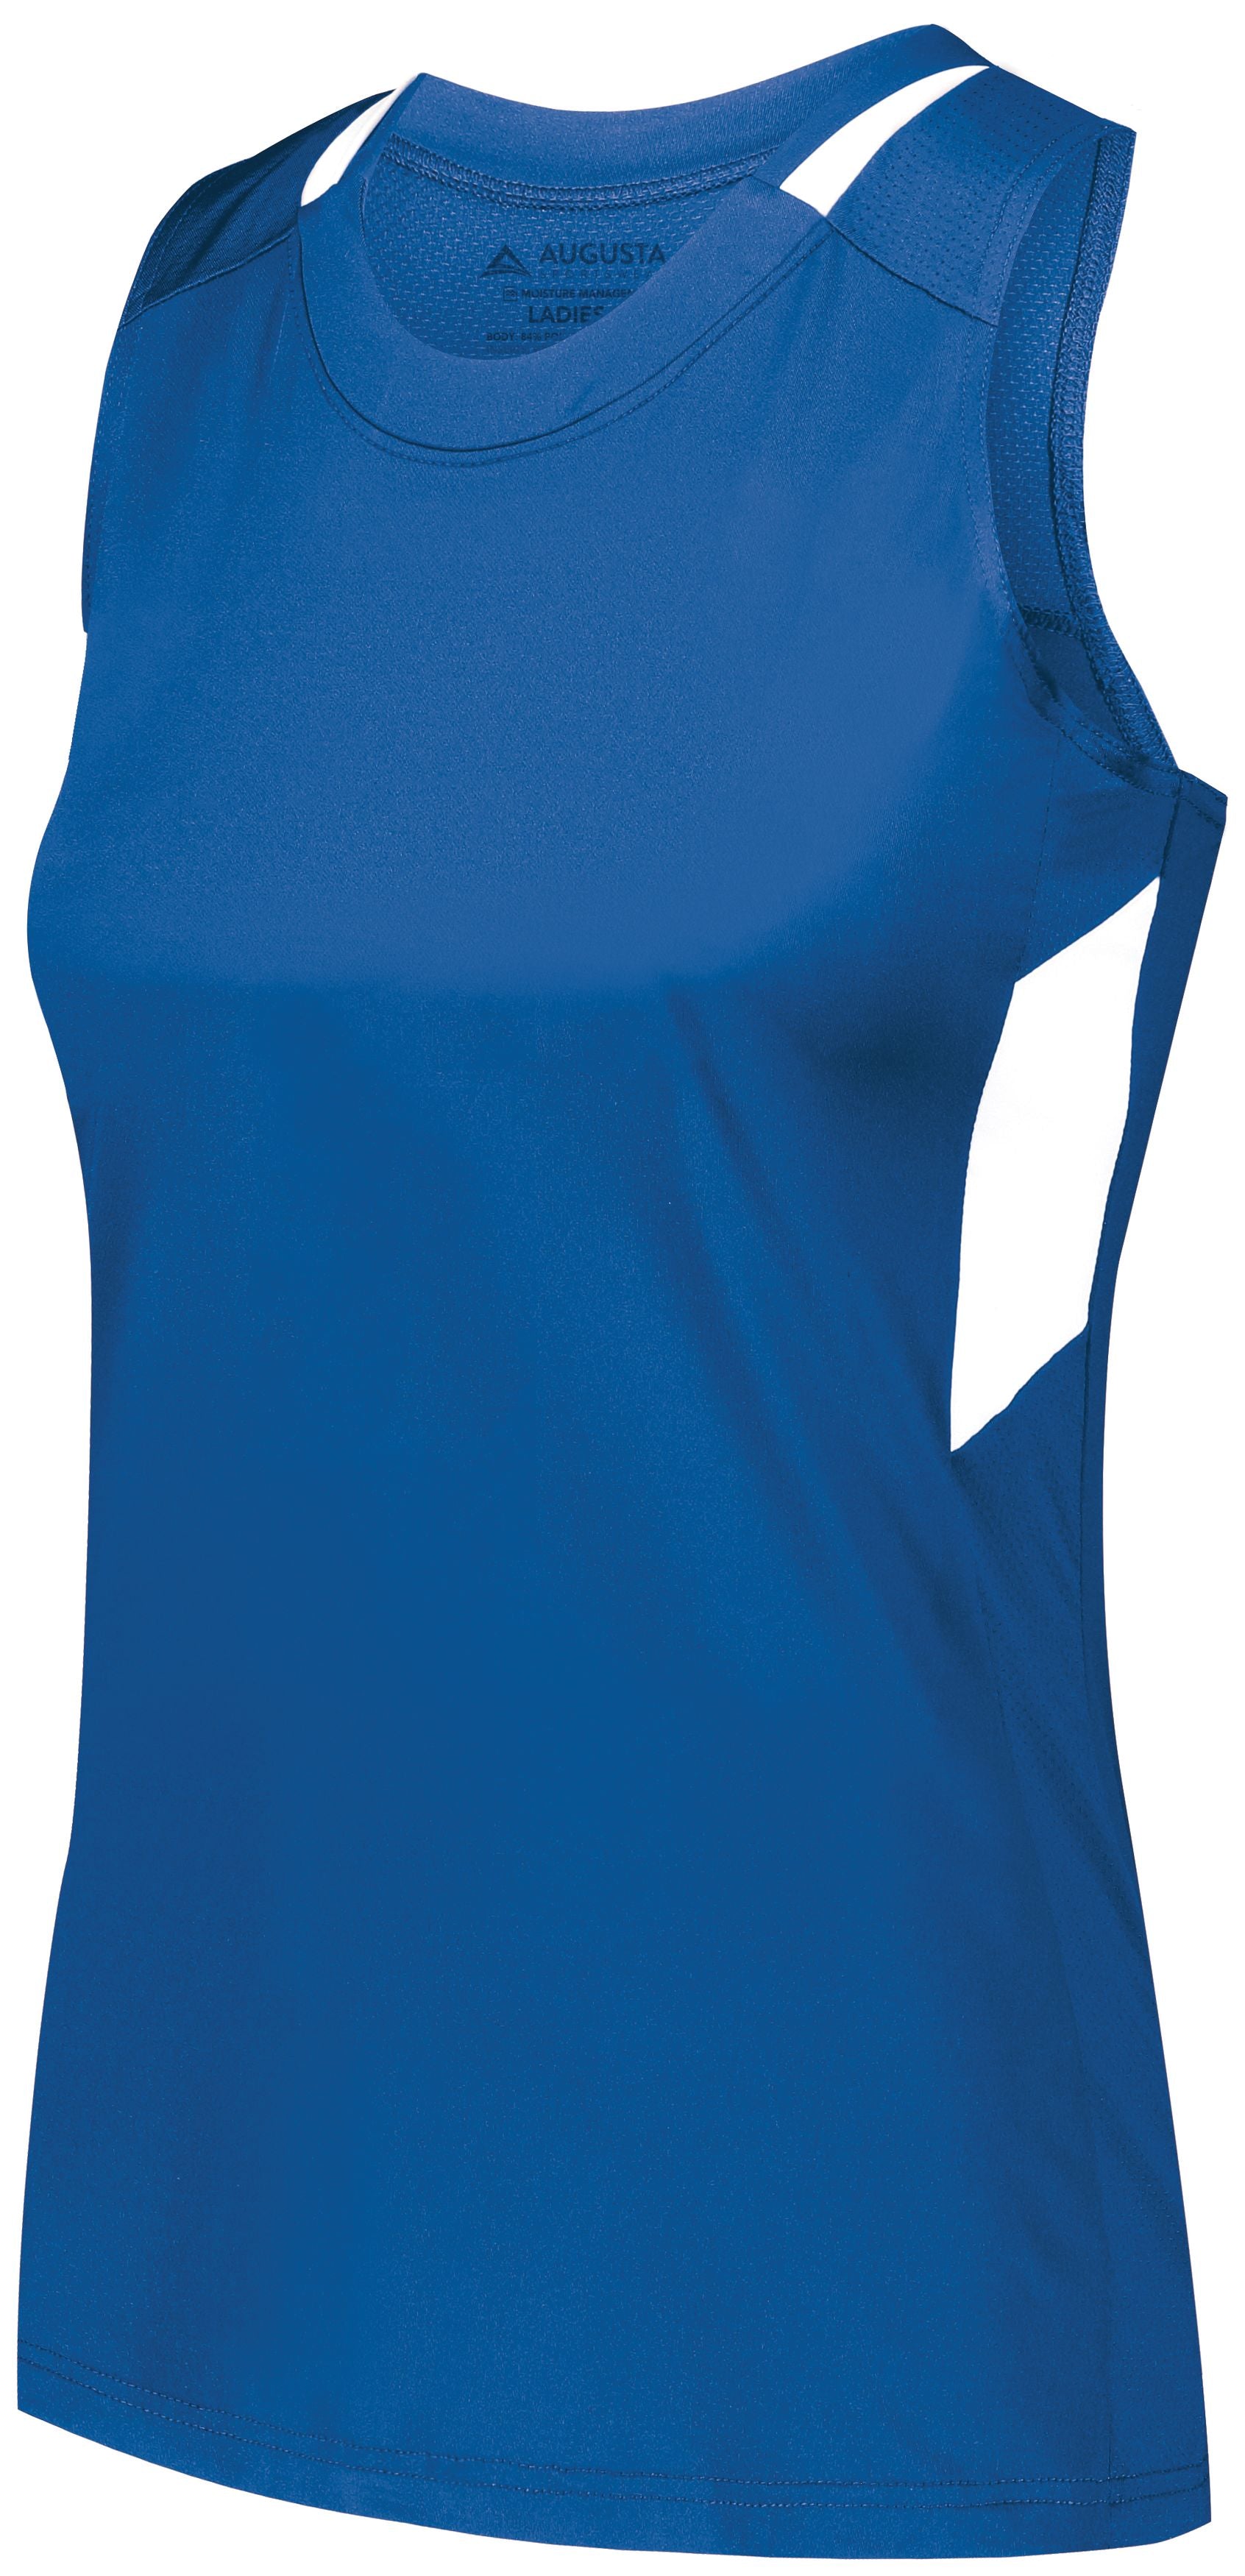 Augusta Sportswear Girls Crossover Tank in Royal/White  -Part of the Girls, Augusta-Products, Lacrosse, Girls-Tank, Shirts, All-Sports, All-Sports-1 product lines at KanaleyCreations.com